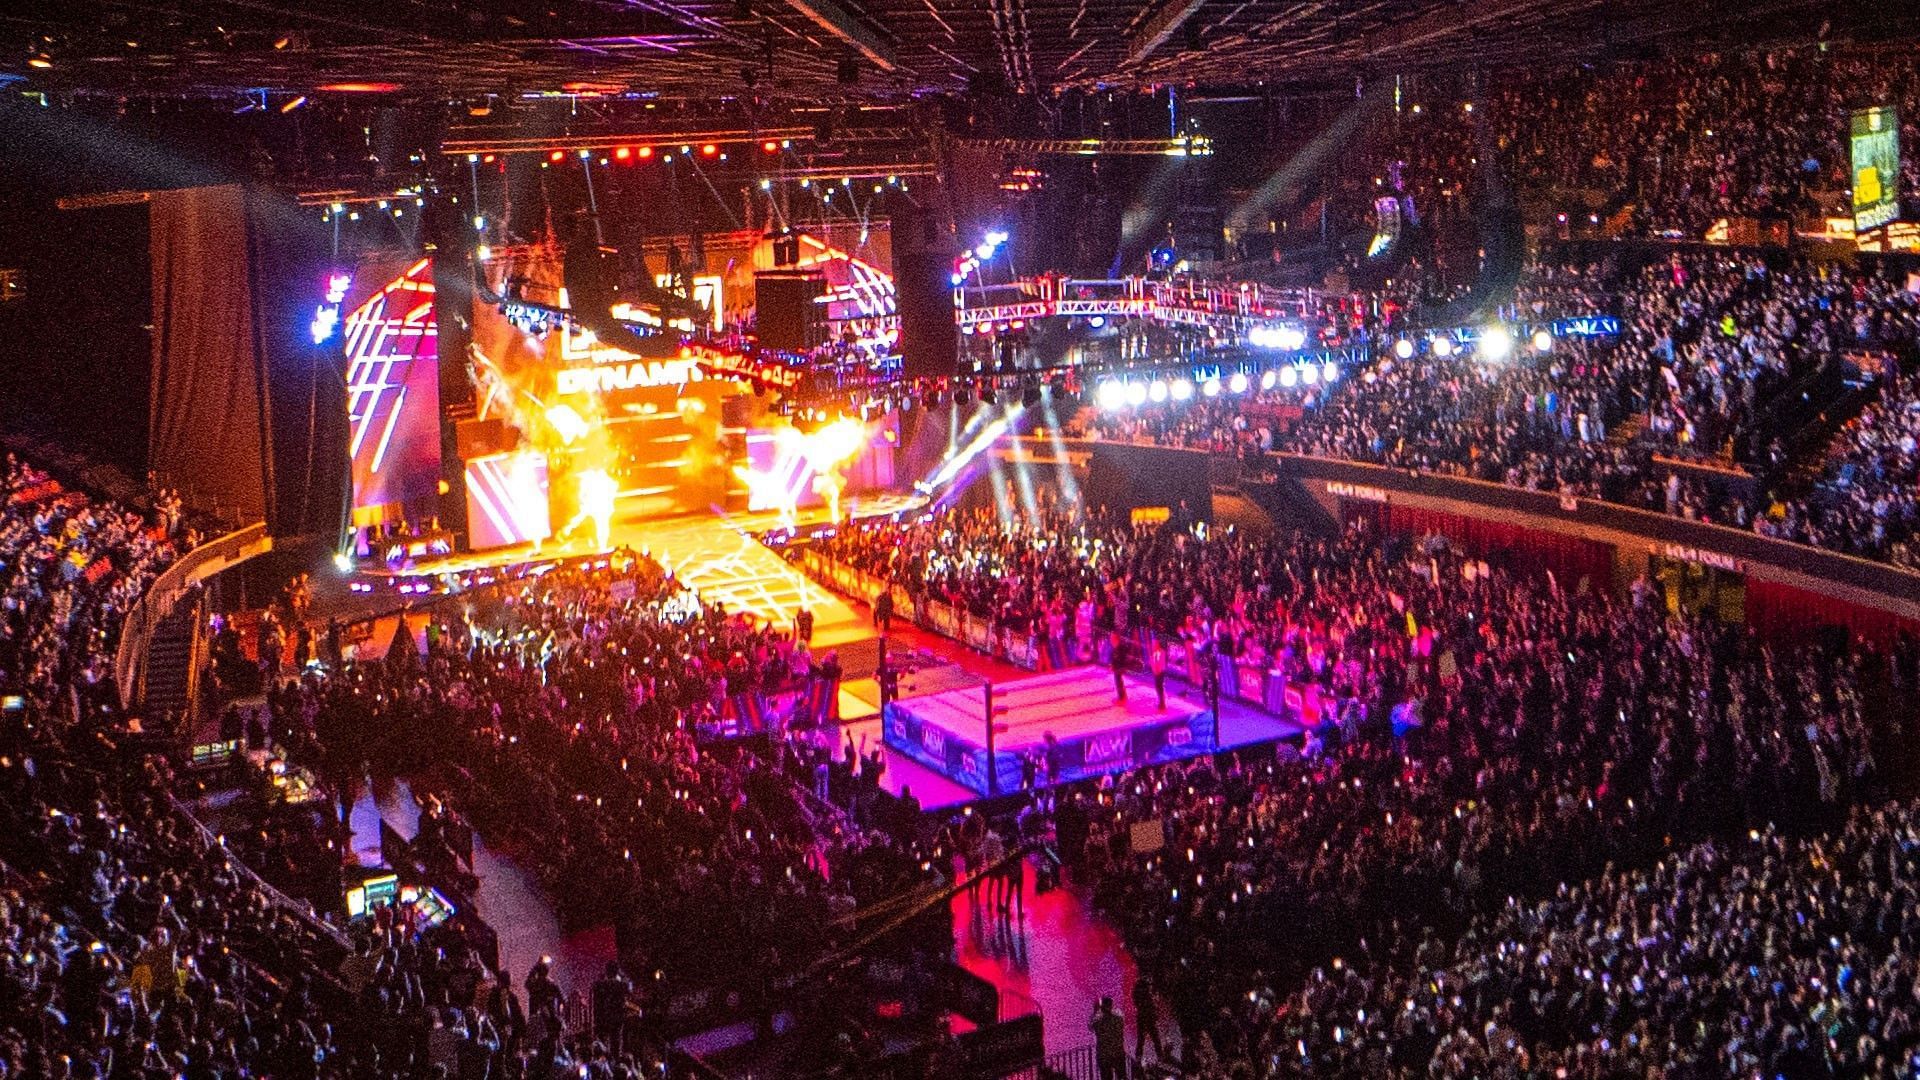 AEW fans pack their local arena for a live Dynamite